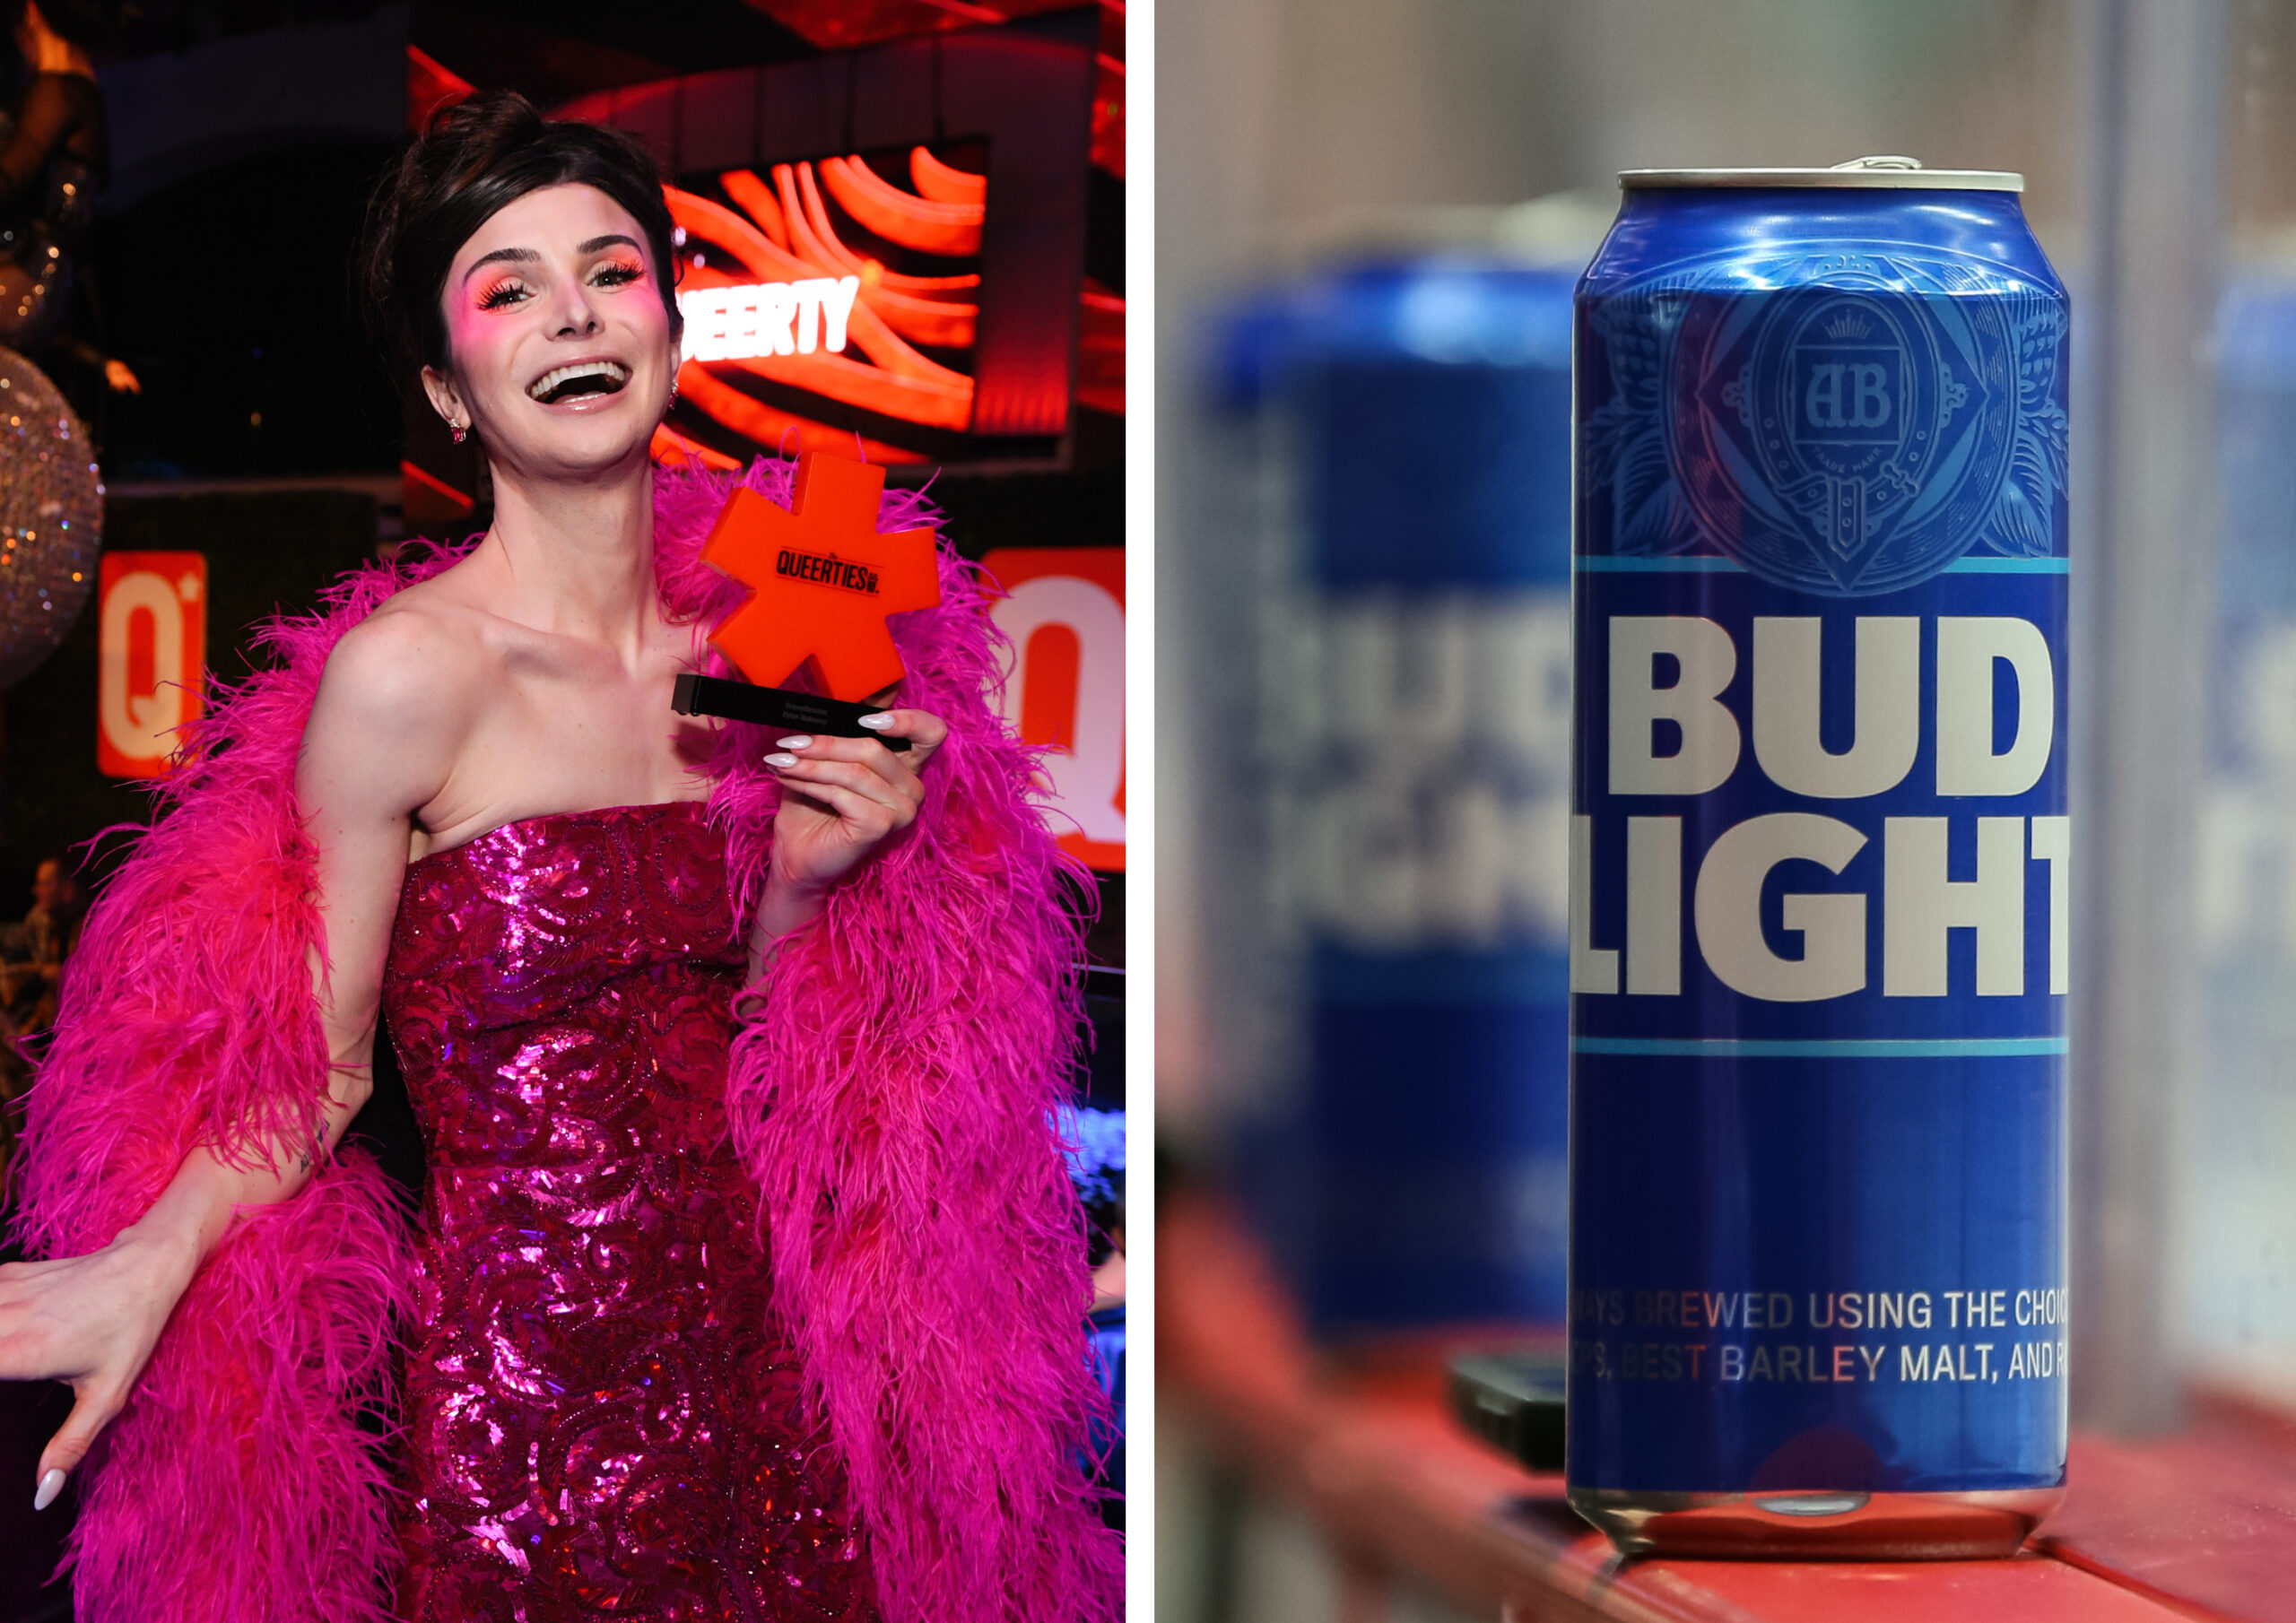 Bud Light’s rankings suffer due to Dylan Mulvaney fiasco.